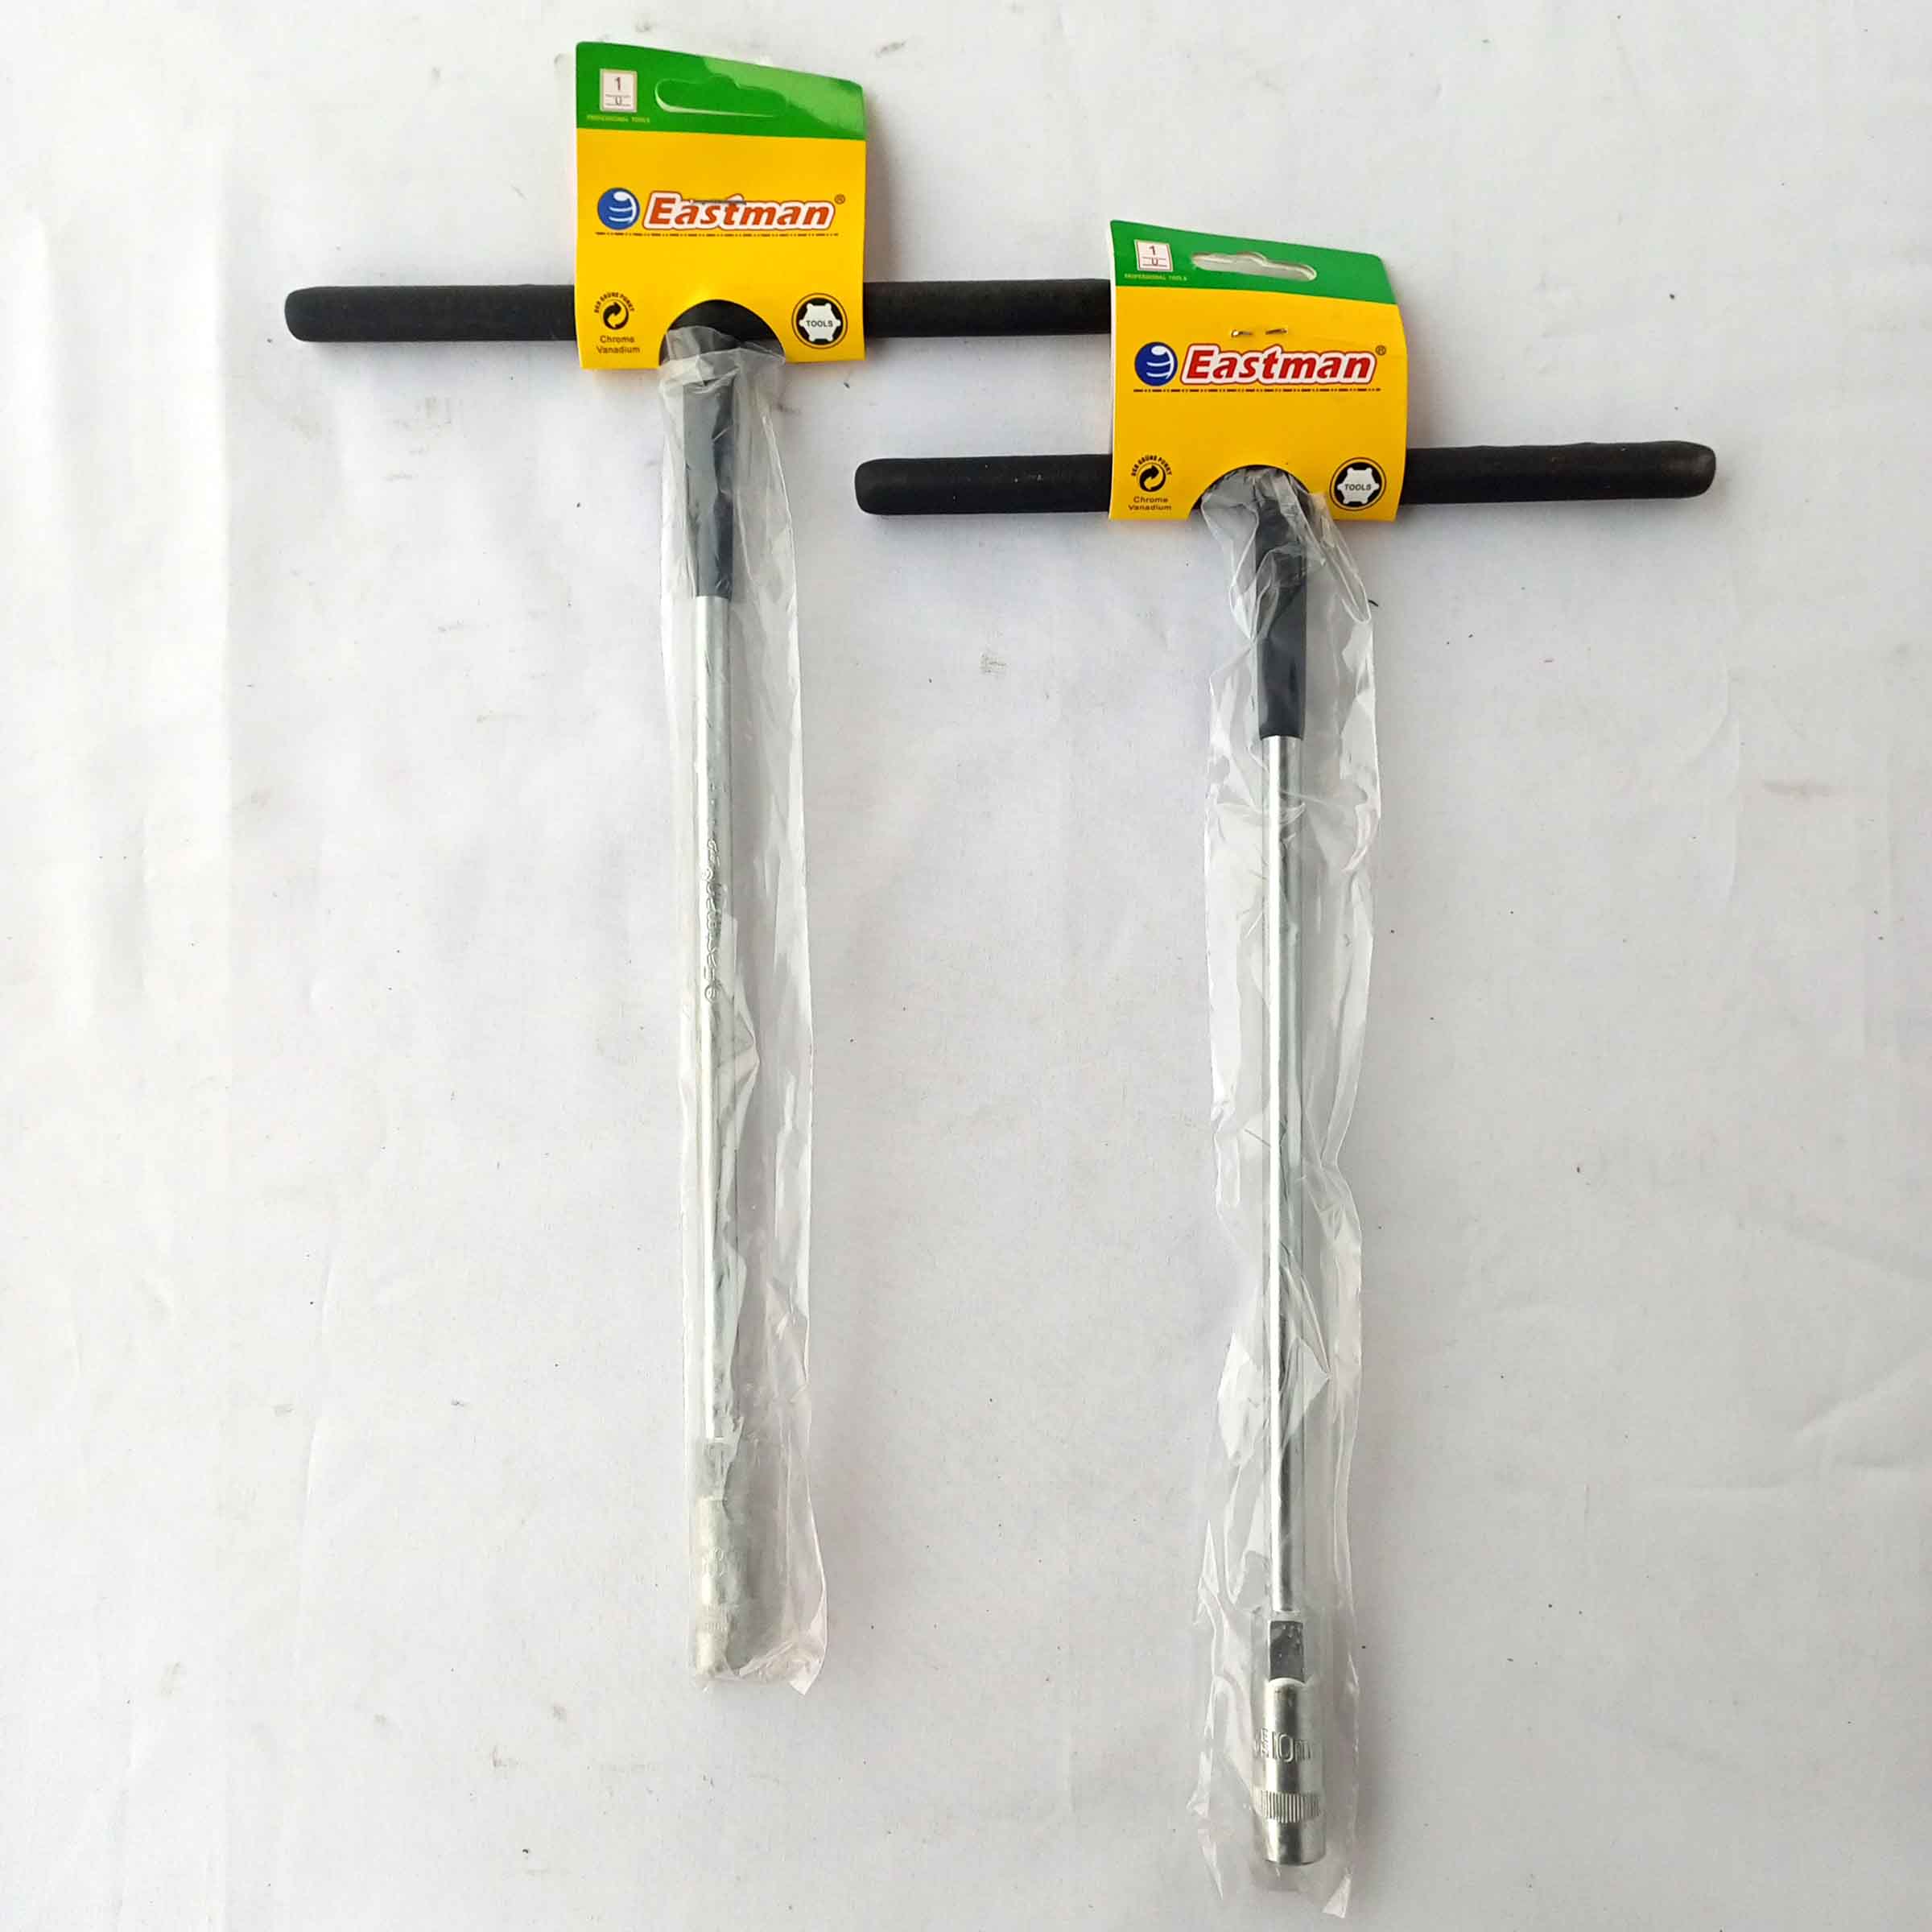 EASTMAN E-2005_KIT-05-80 Combination Spanner - Recessed Panel -CRV Double  Sided Combination Wrench Price in India - Buy EASTMAN E-2005_KIT-05-80 Combination  Spanner - Recessed Panel -CRV Double Sided Combination Wrench online at  Flipkart.com